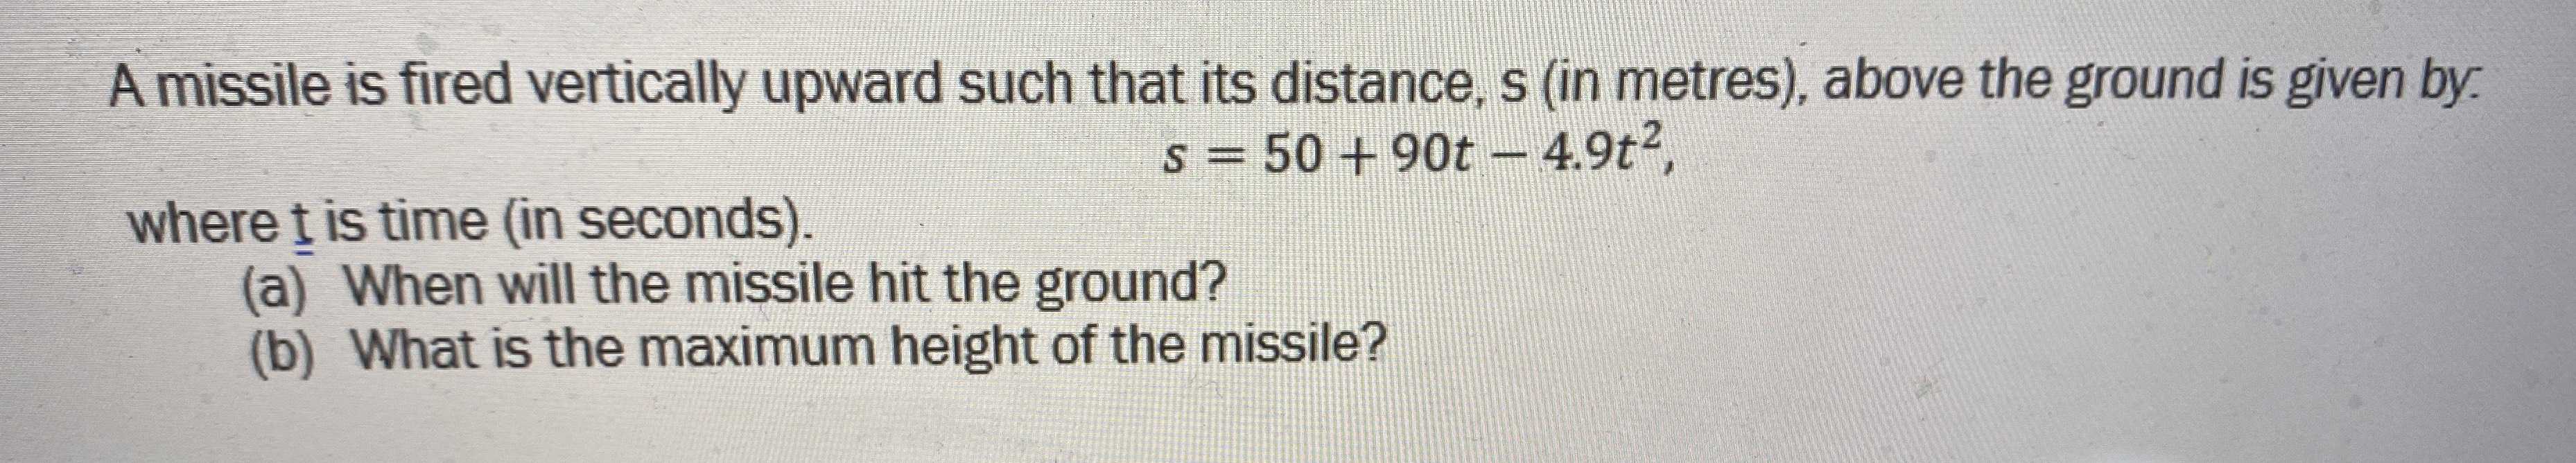 A missile is fired vertically upward such that its...